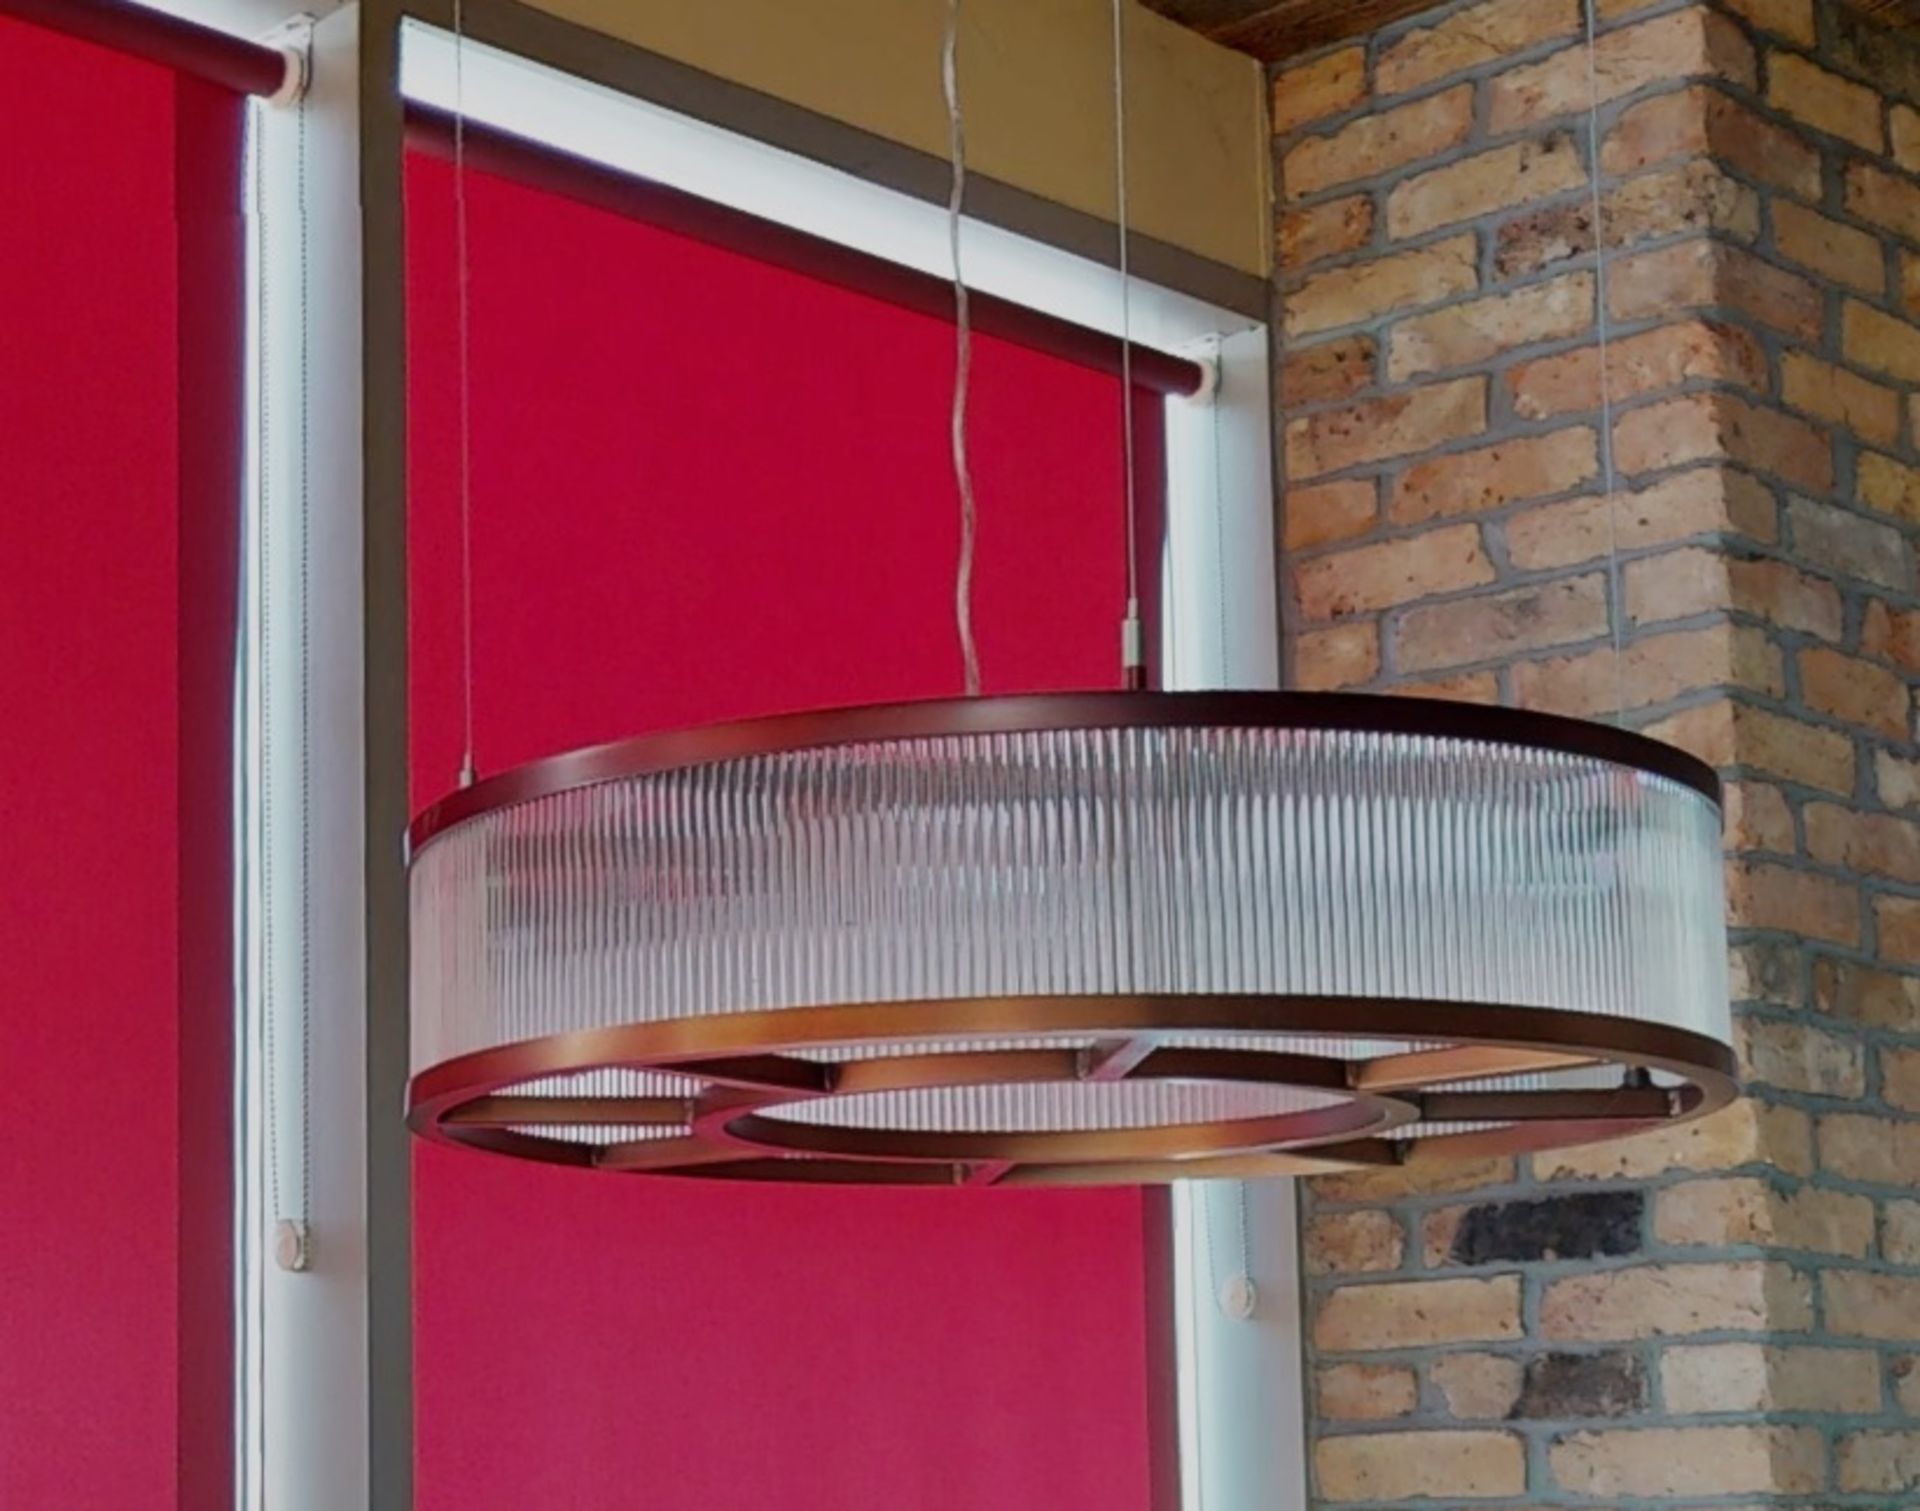 1 x Large Commercial Circular Art Deco-Style Suspended Light Fitting - Features A Copper Finish - Image 3 of 4